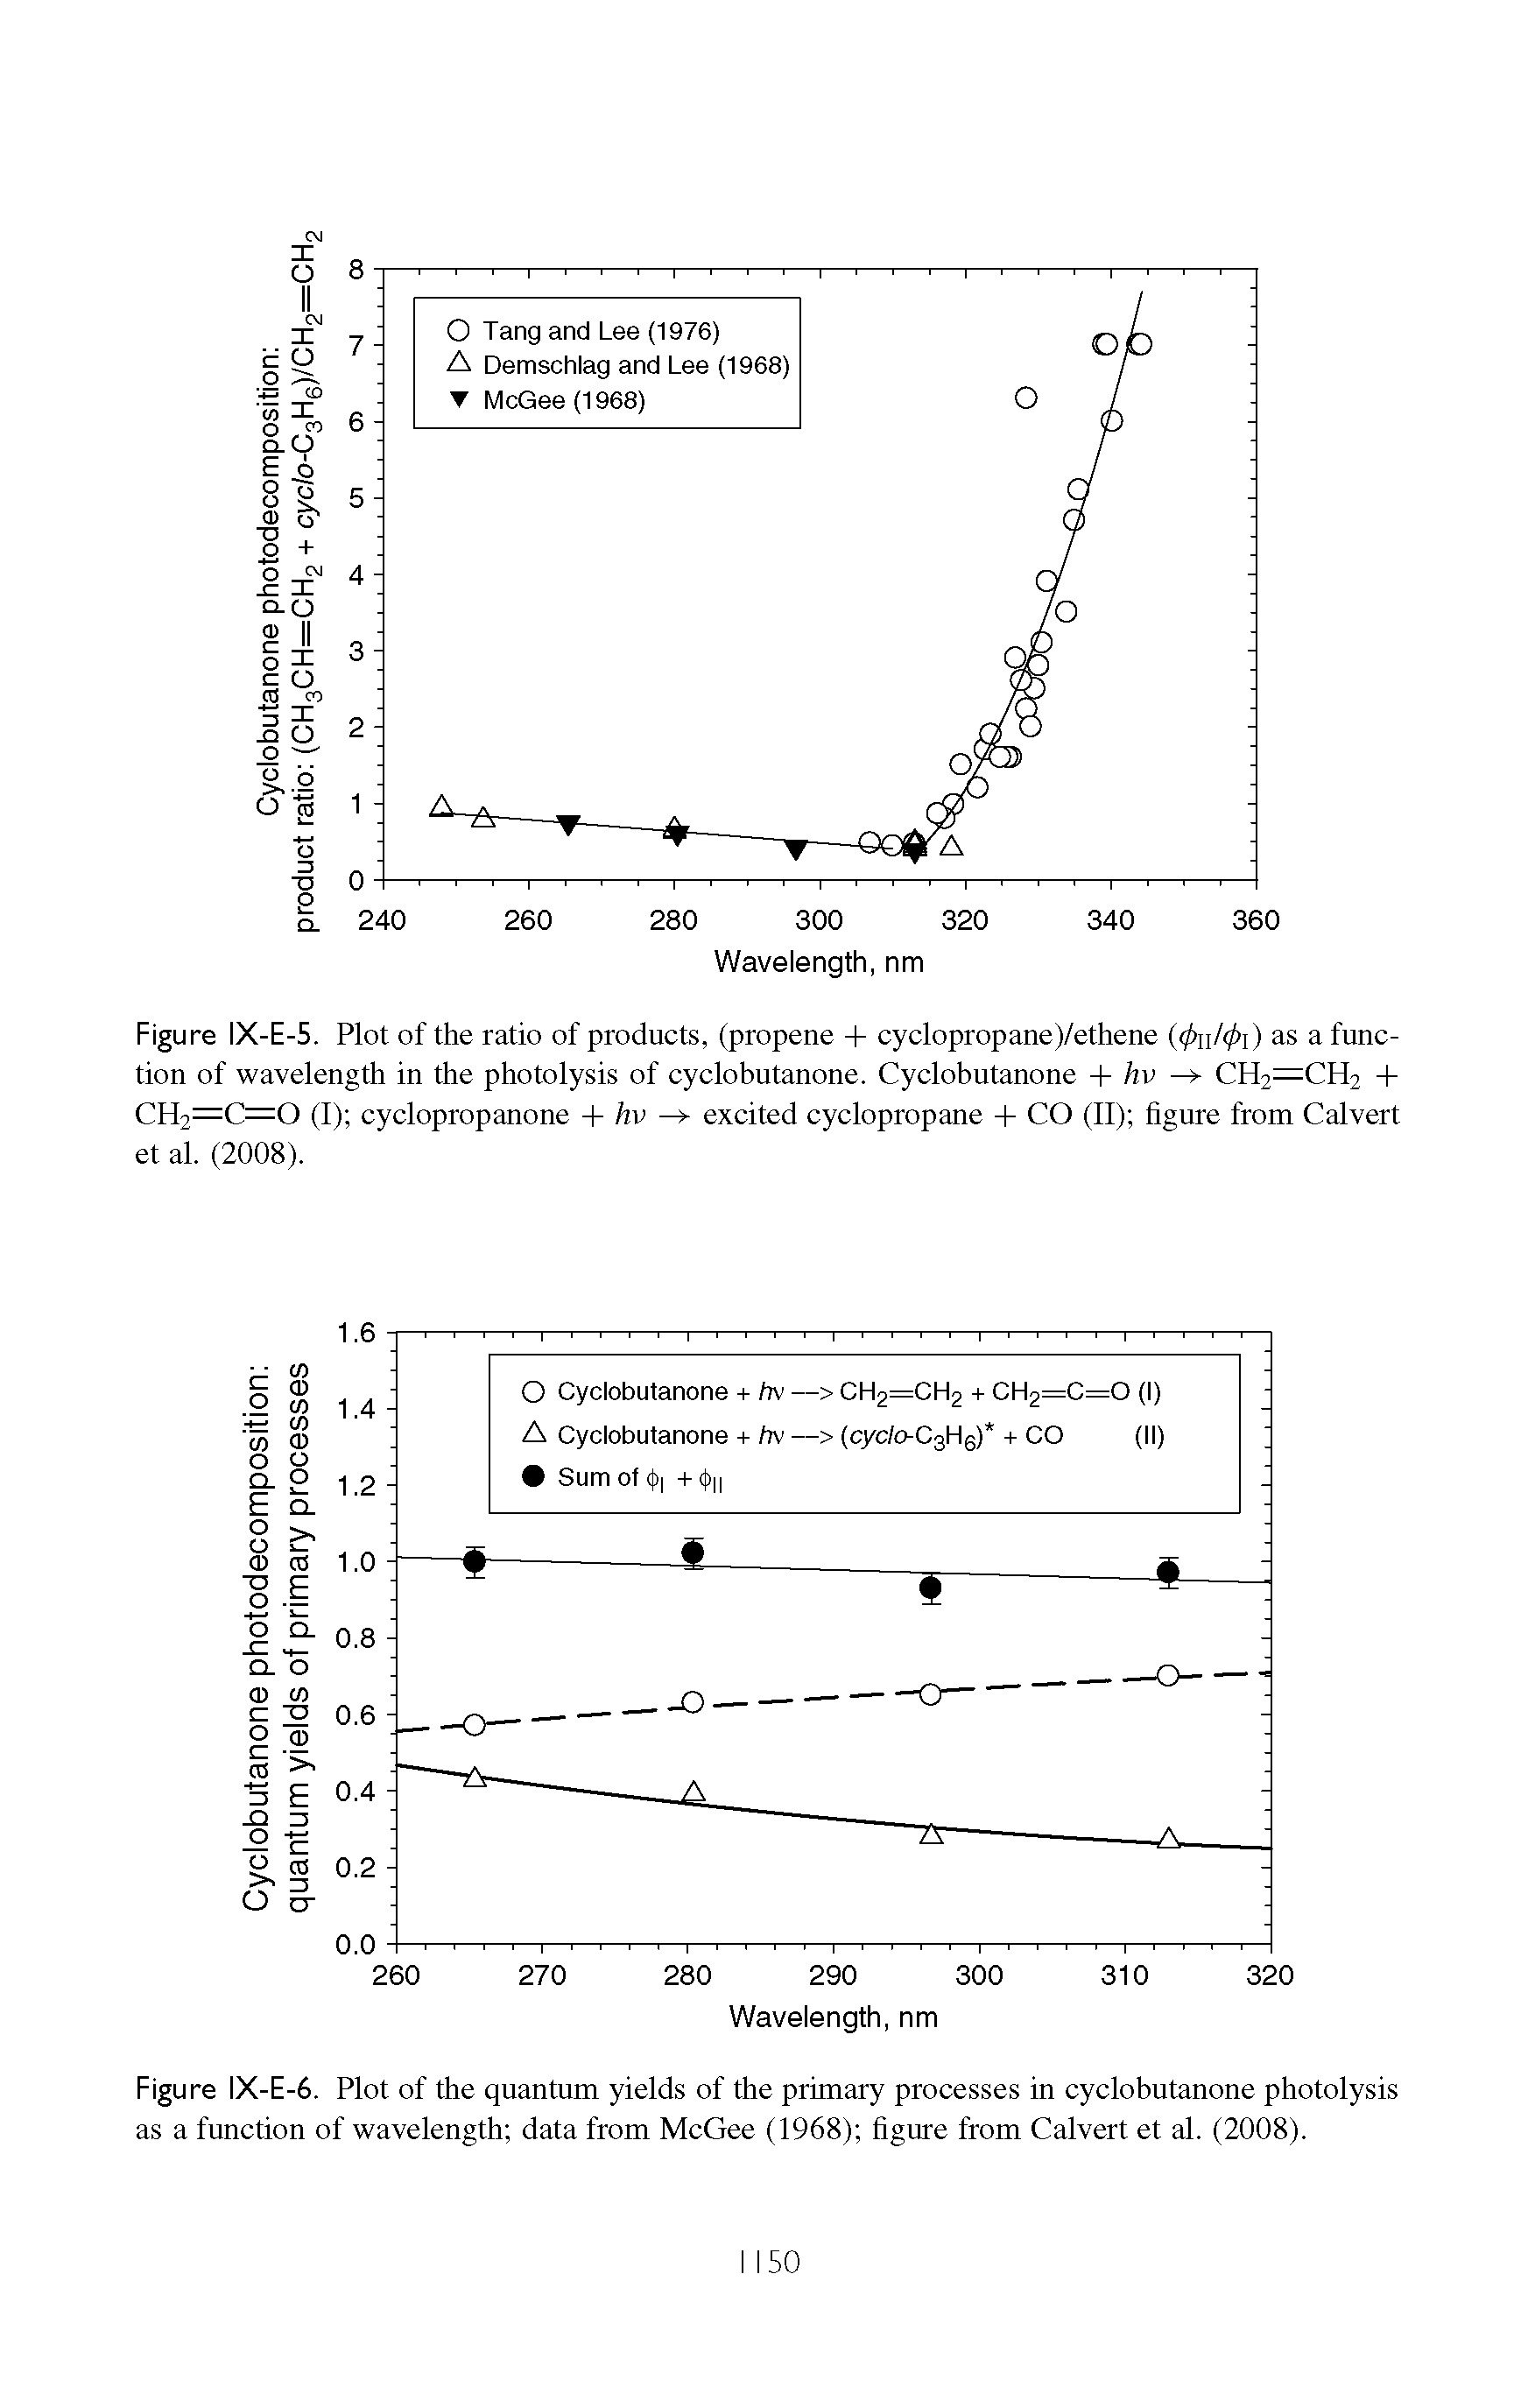 Figure IX-E-6. Plot of the quantum yields of the primary processes in cyclobutanone photolysis as a function of wavelength data from McGee (1968) figure from Calvert et al. (2008).